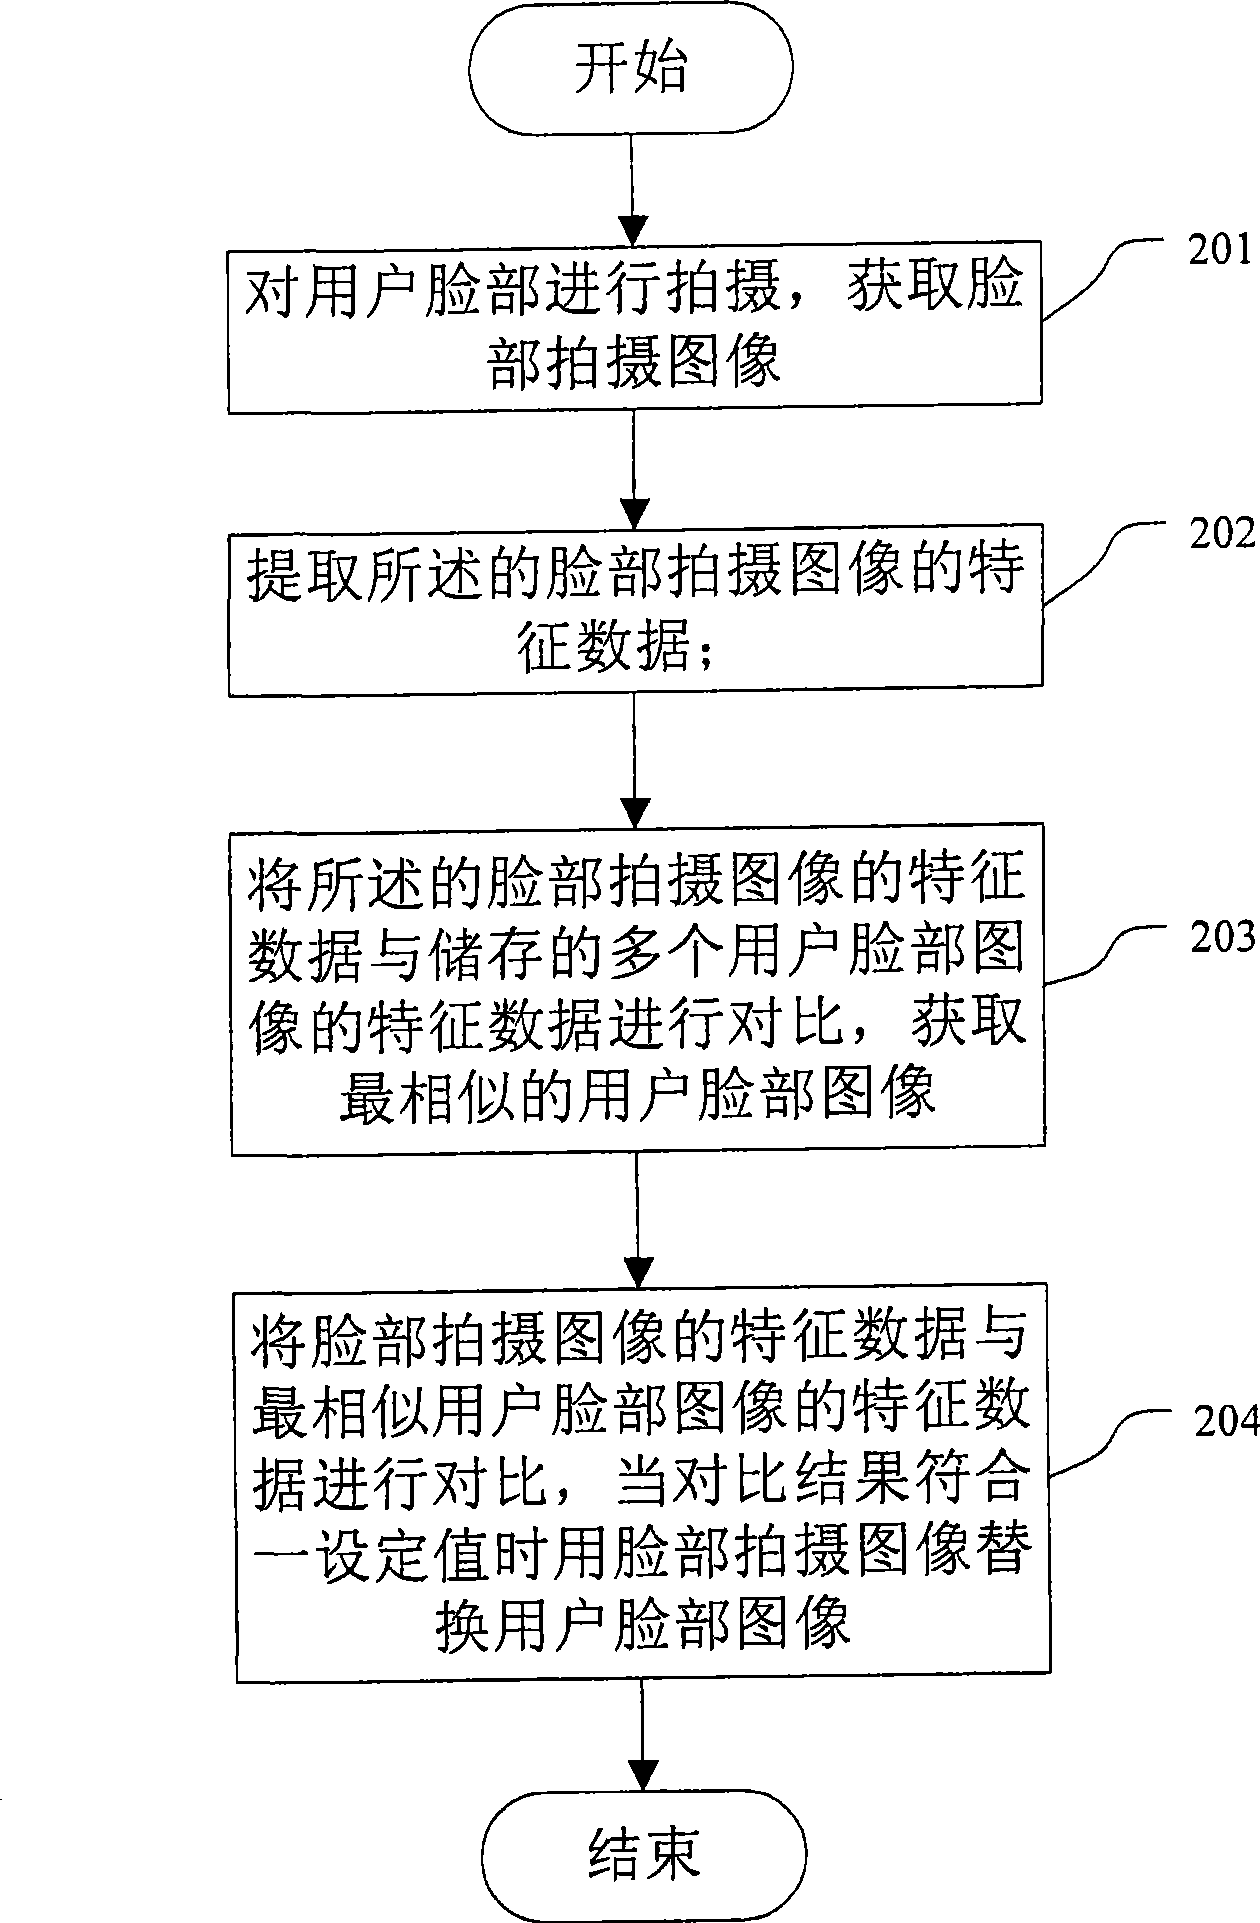 Image updating process and apparatus based on human face recognition